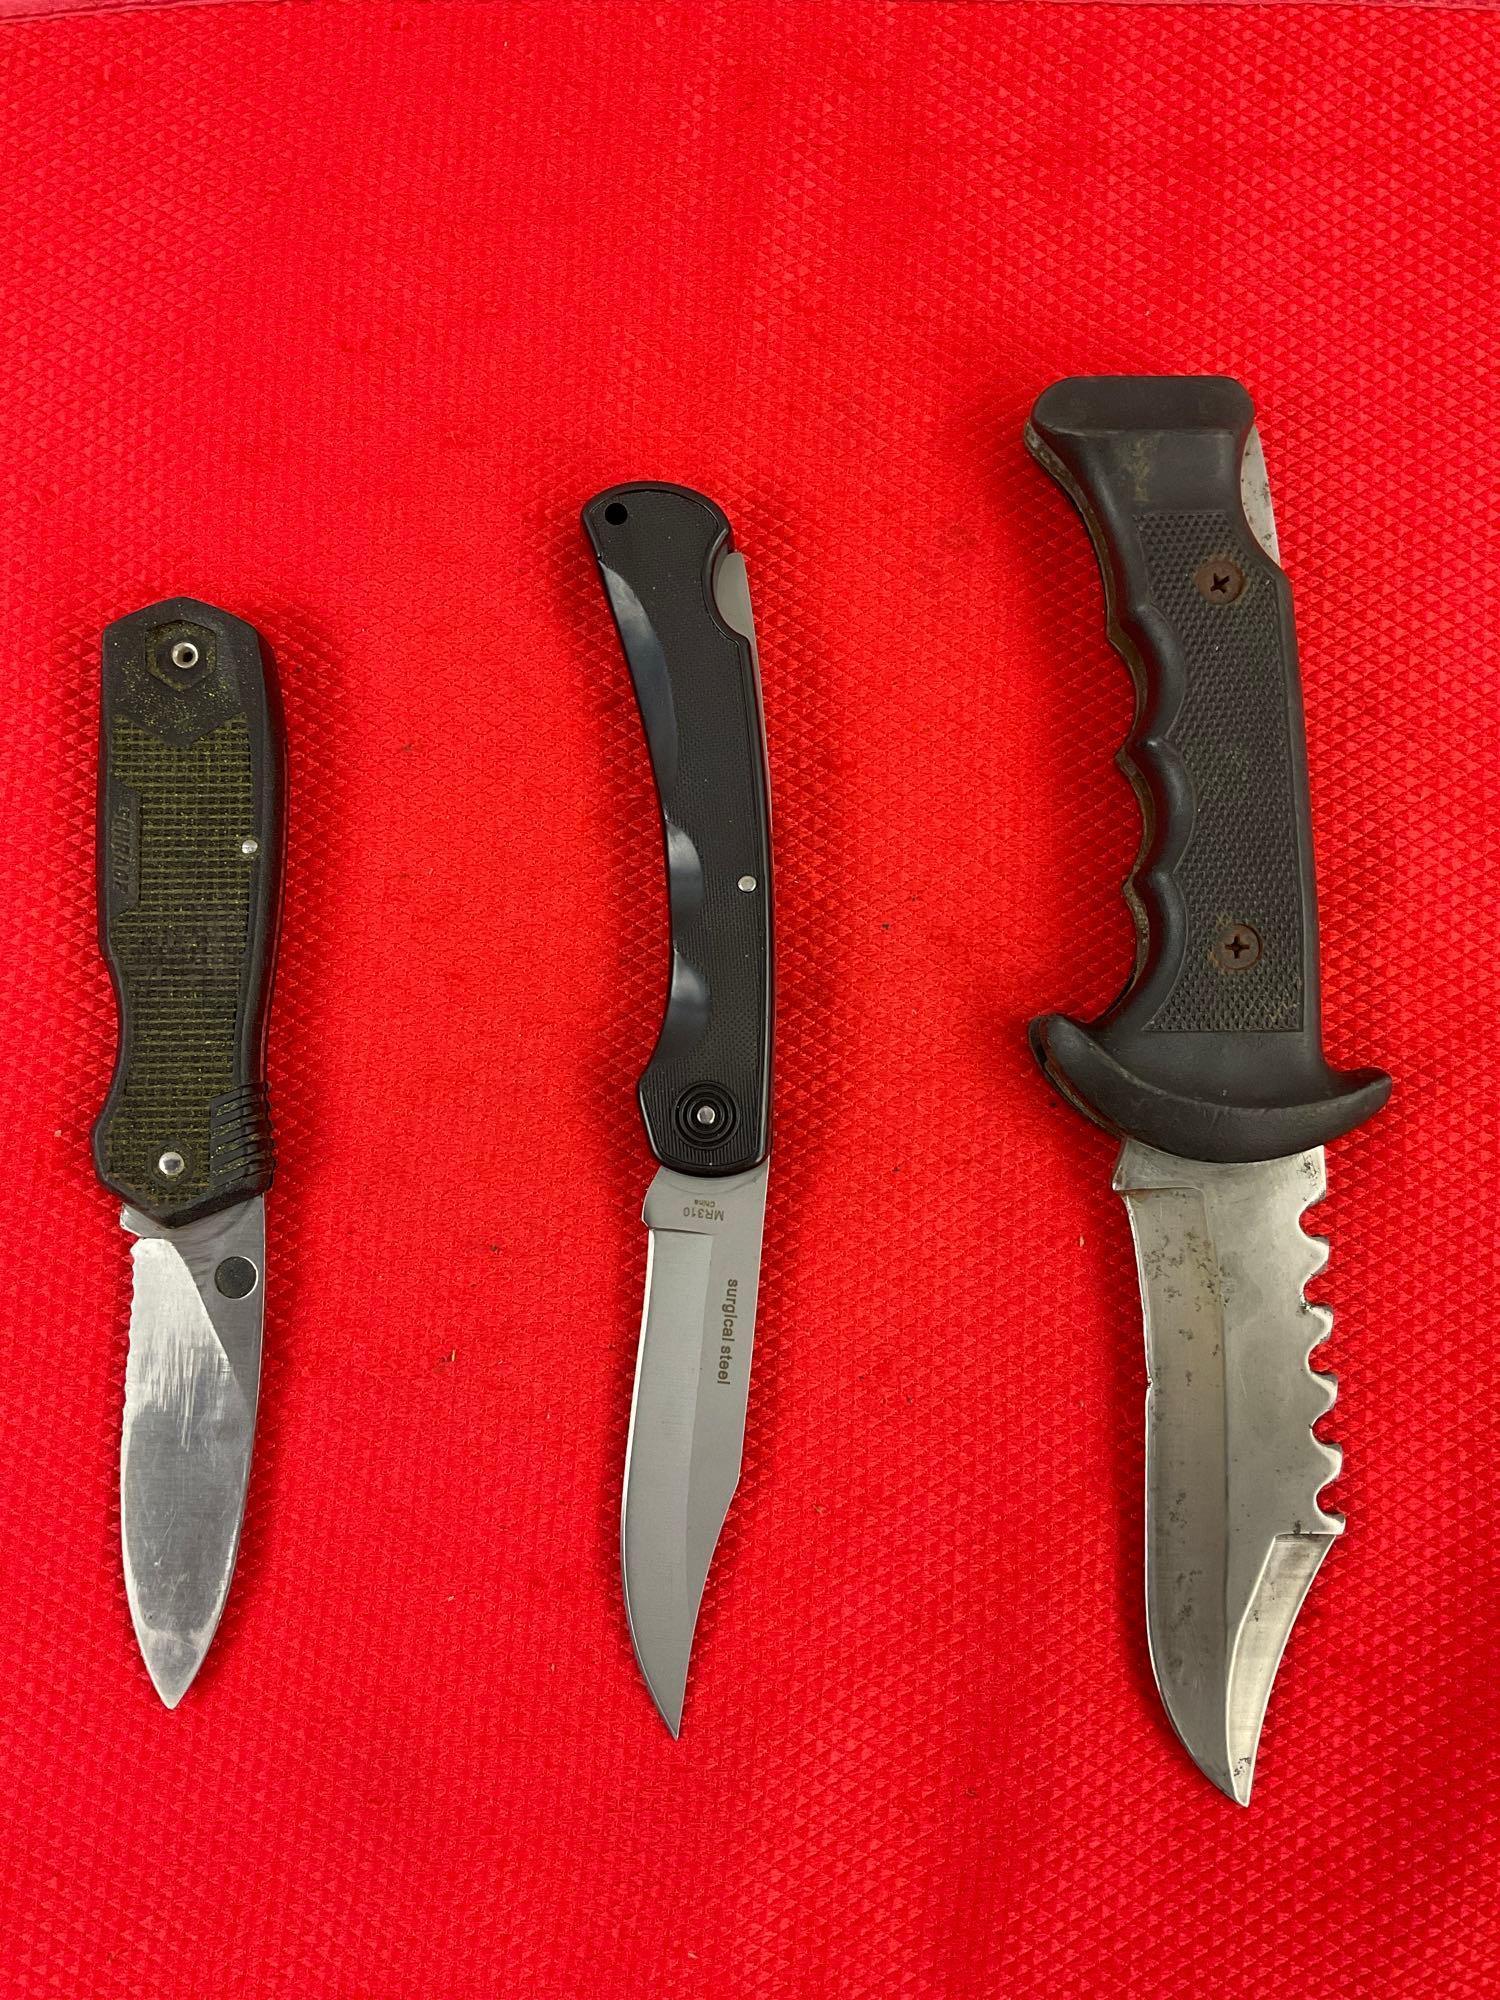 3 pcs Steel Folding Blade Pocket Hunting Knives. 1x Schrade+ CH7, 1x Marble's MR310. See pics.